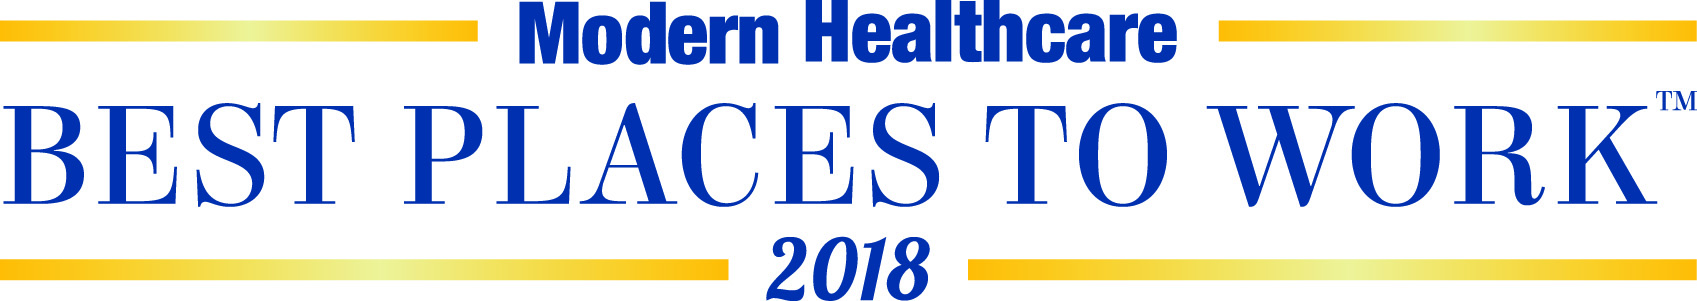 HCI AWARDED 2018 Modern Healthcare Best Places to Work in Healthcare